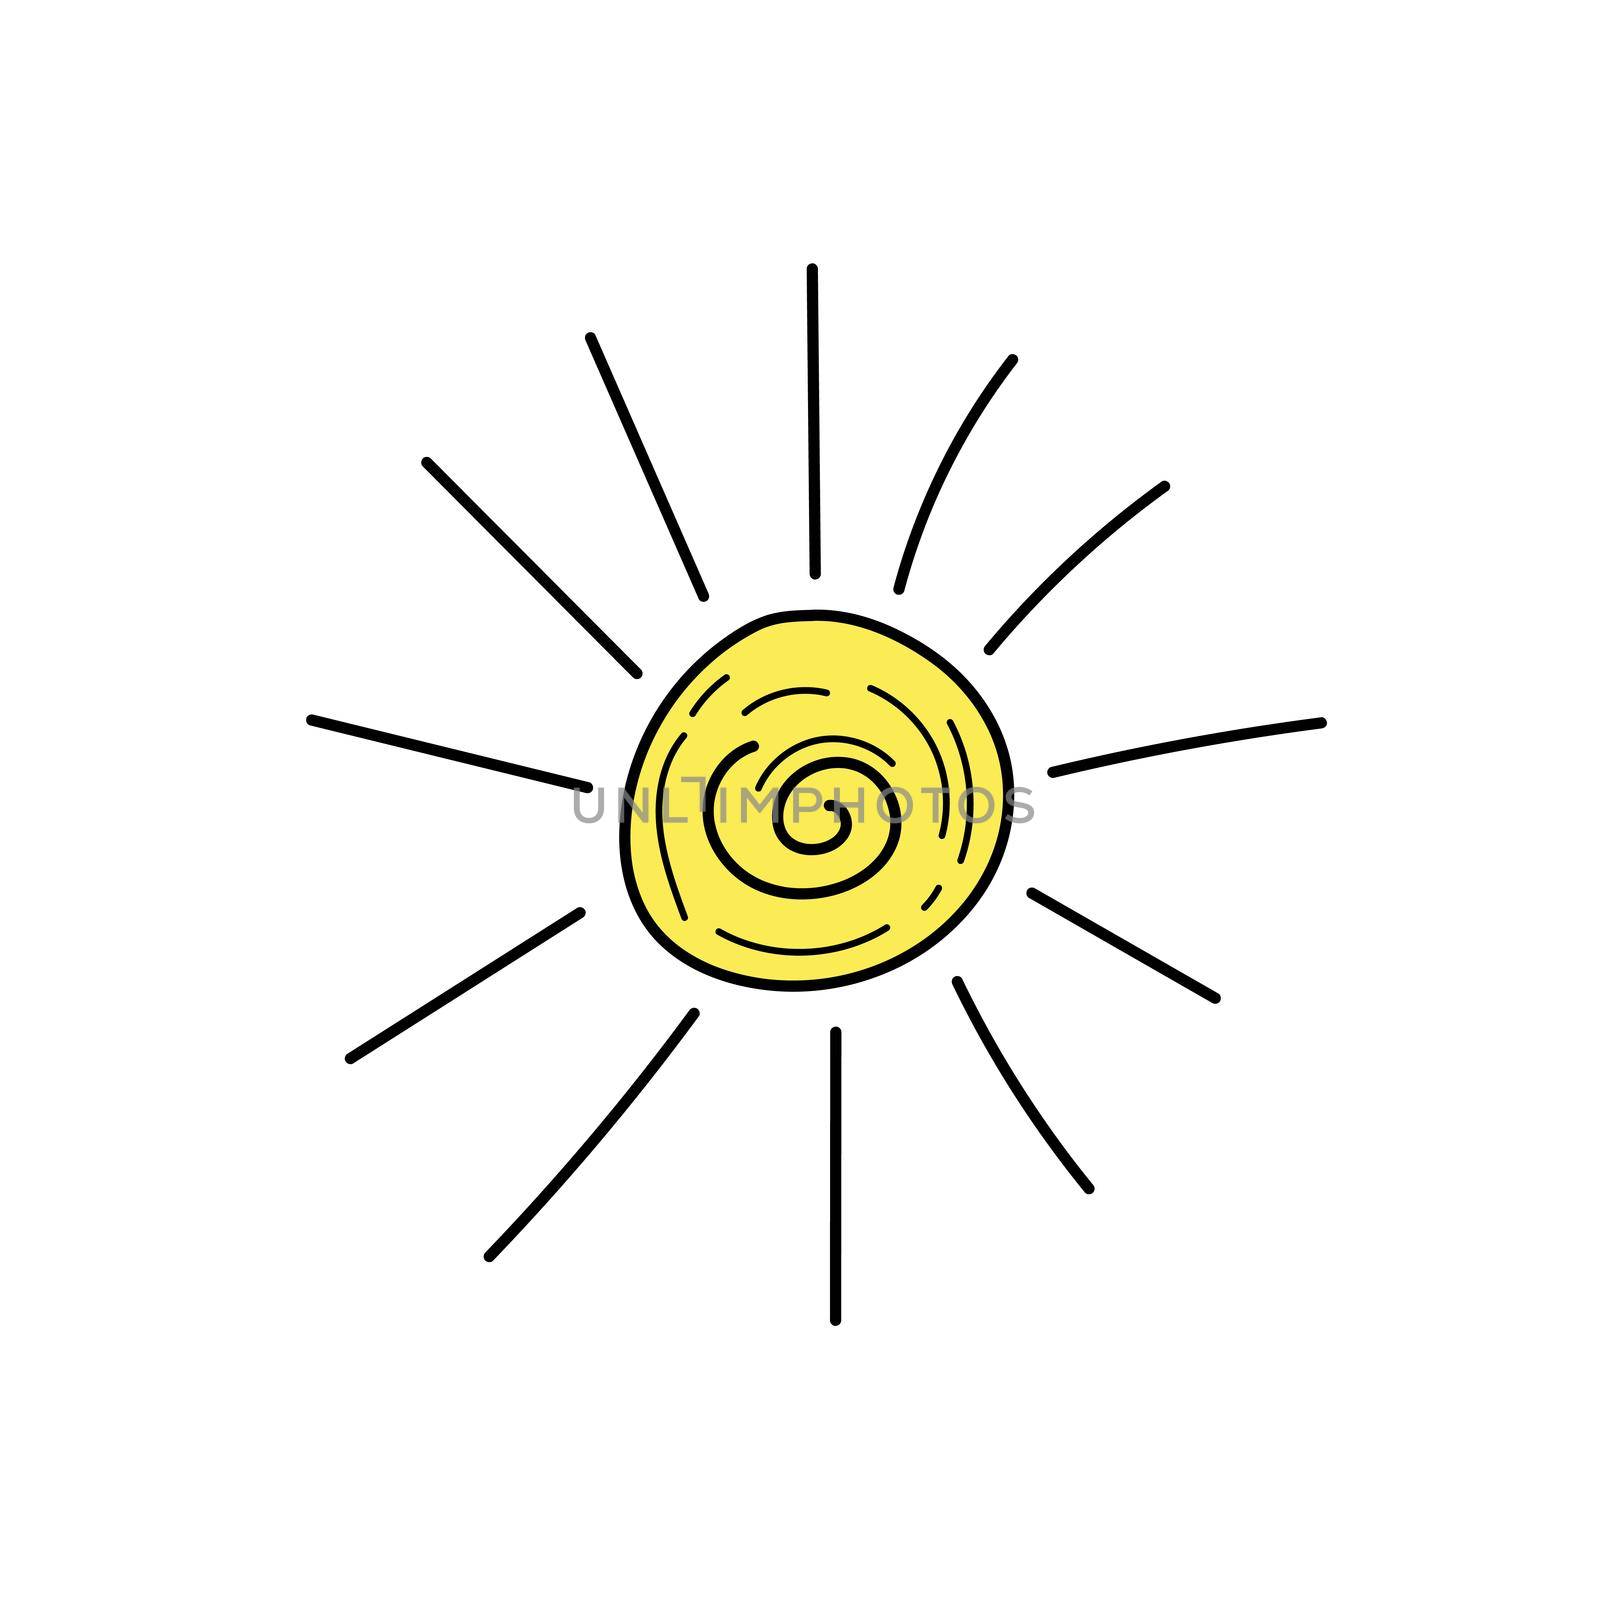 Sketch of sun. Vector illustration. Sun doodle. Simple hand drawn icon on white by natali_brill